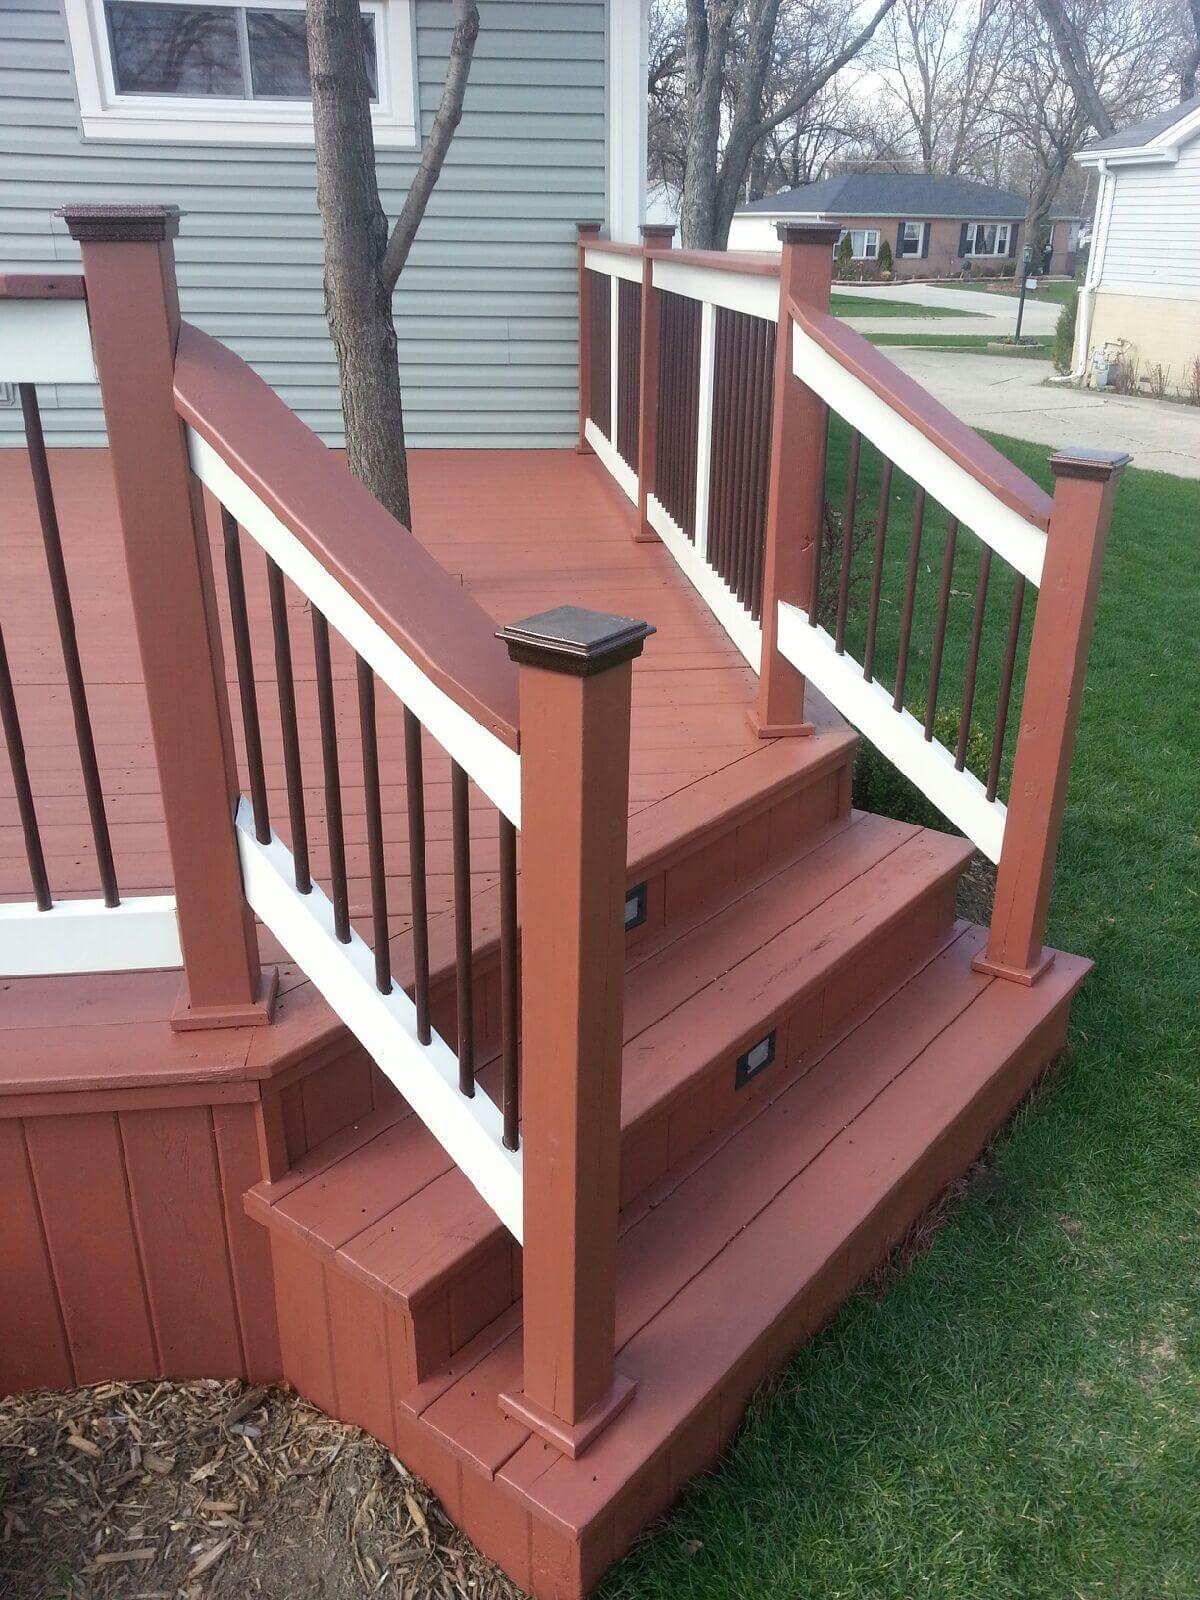 Repairs and maintenance for your deck, fence, and exterior wood staining. - Deck Staining Des Plaines - Deck Cleaning Services